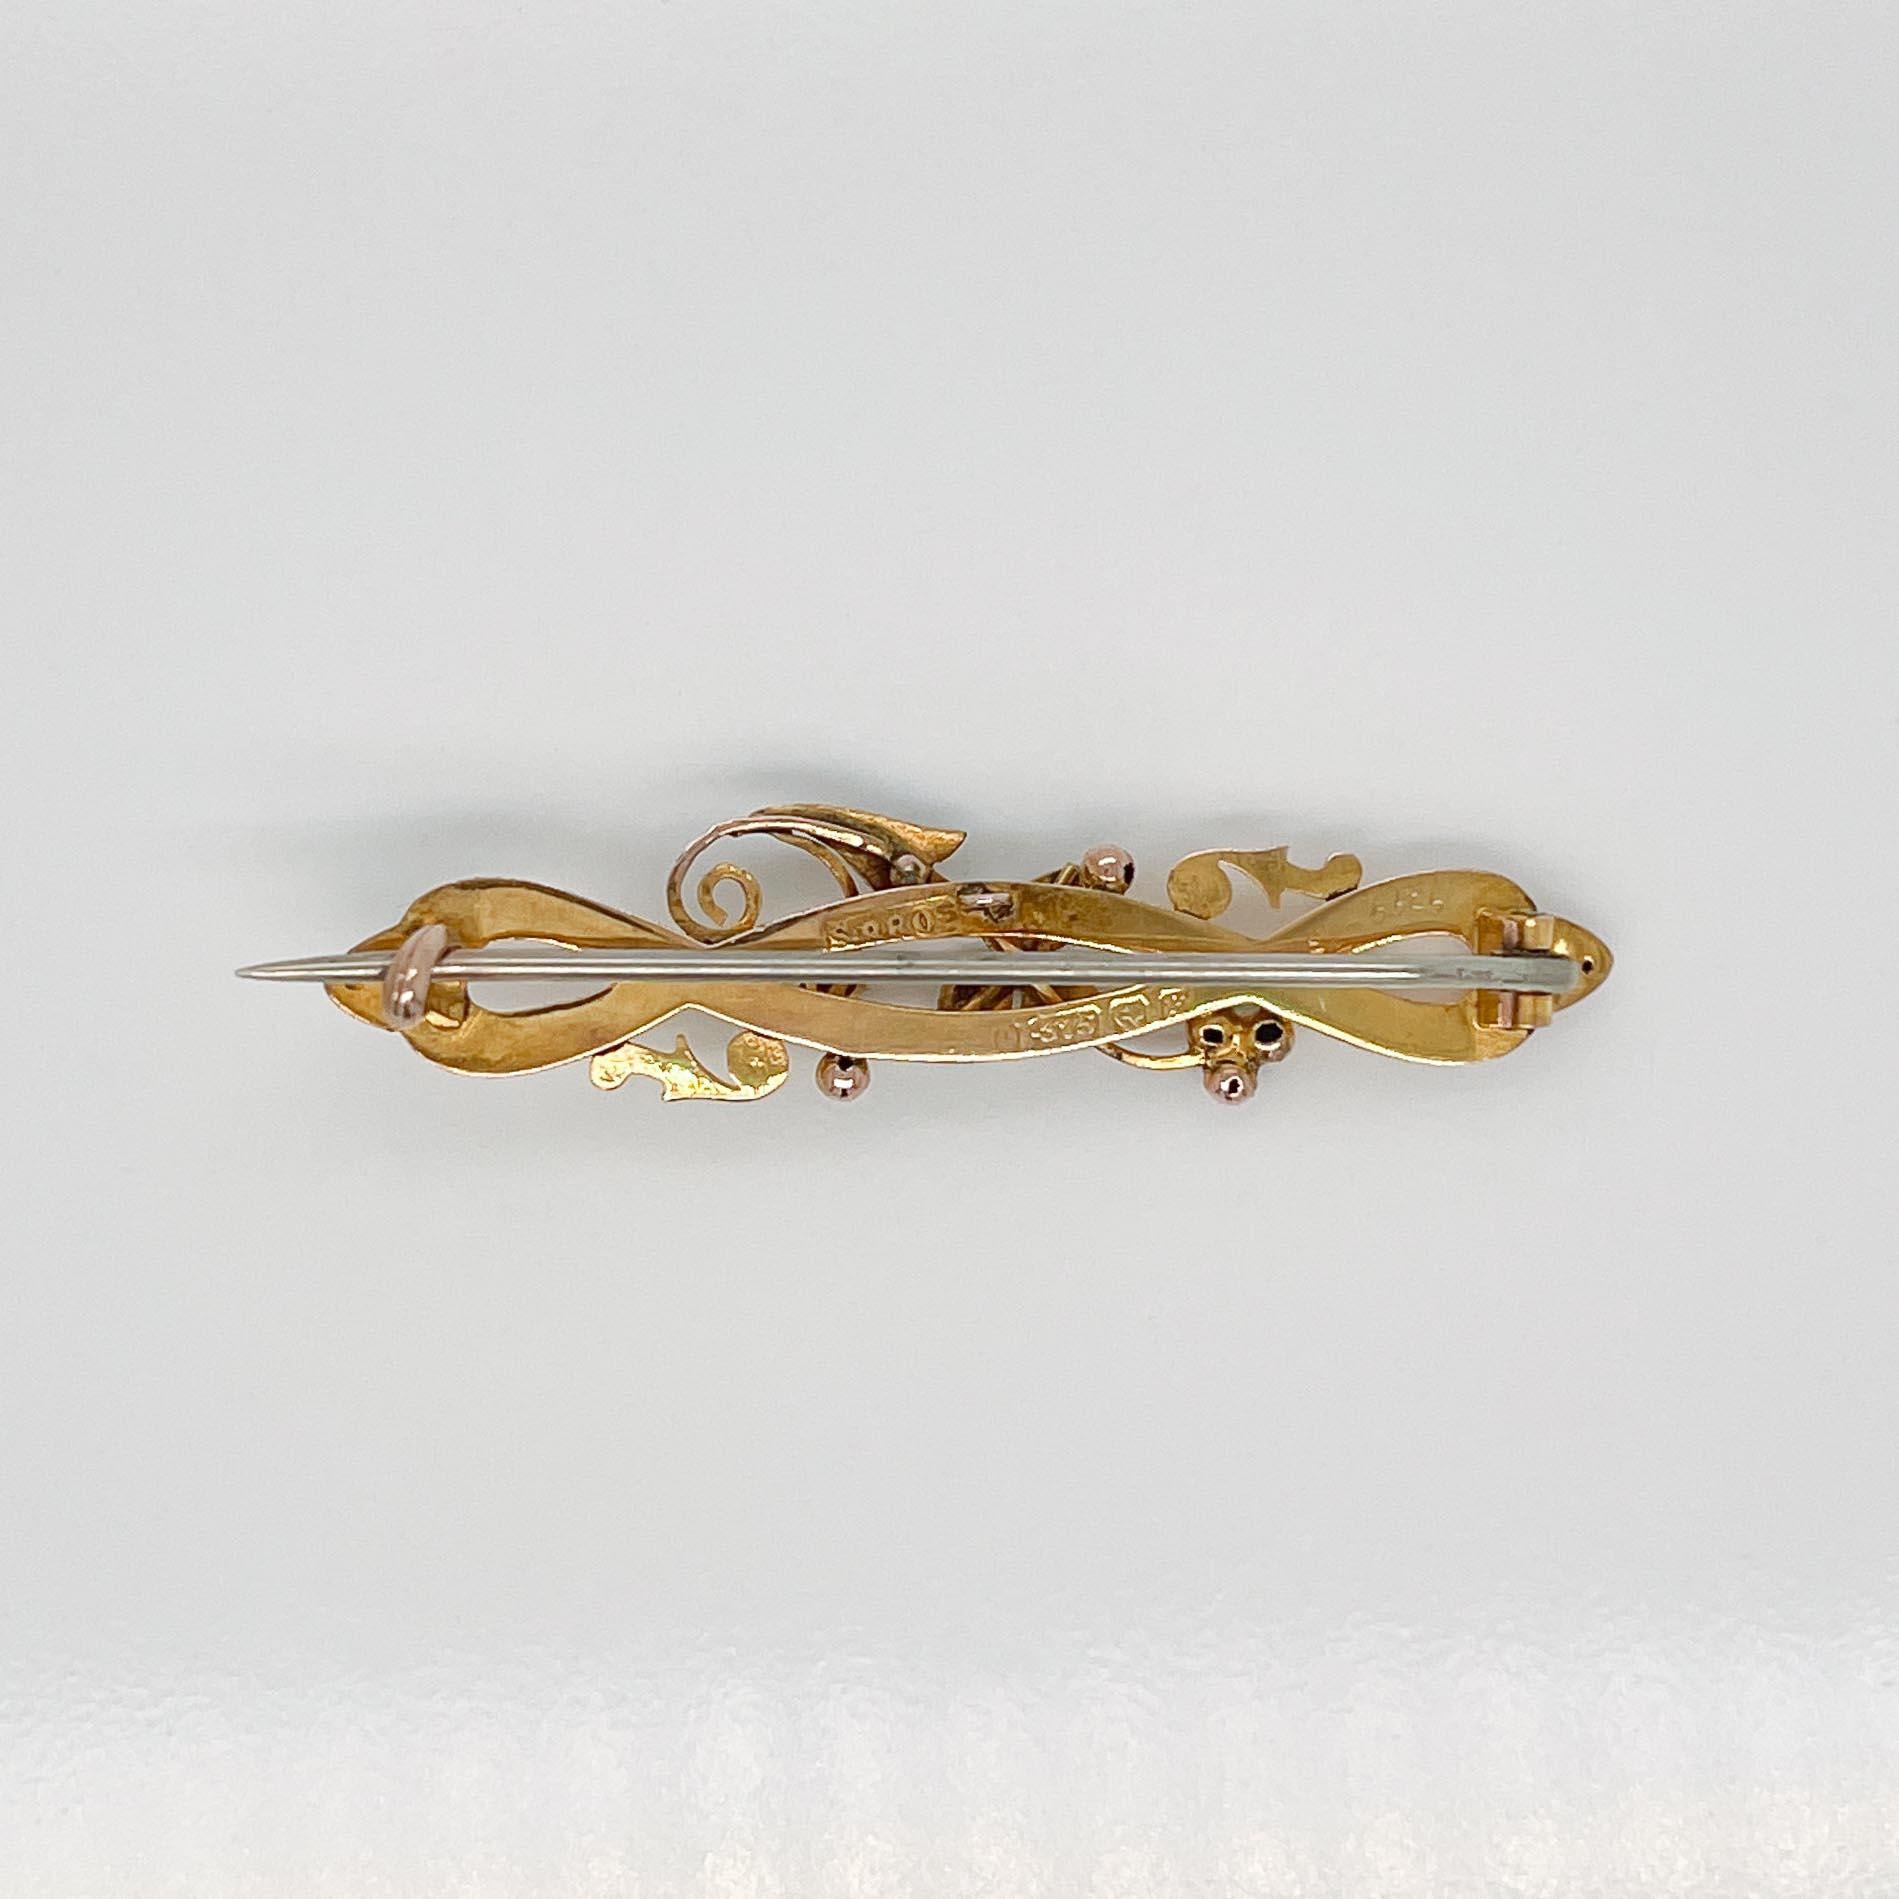 Signed Antique English Art Nouveau 9 Ct Gold & Seed Pearl Brooch / Pendant For Sale 2